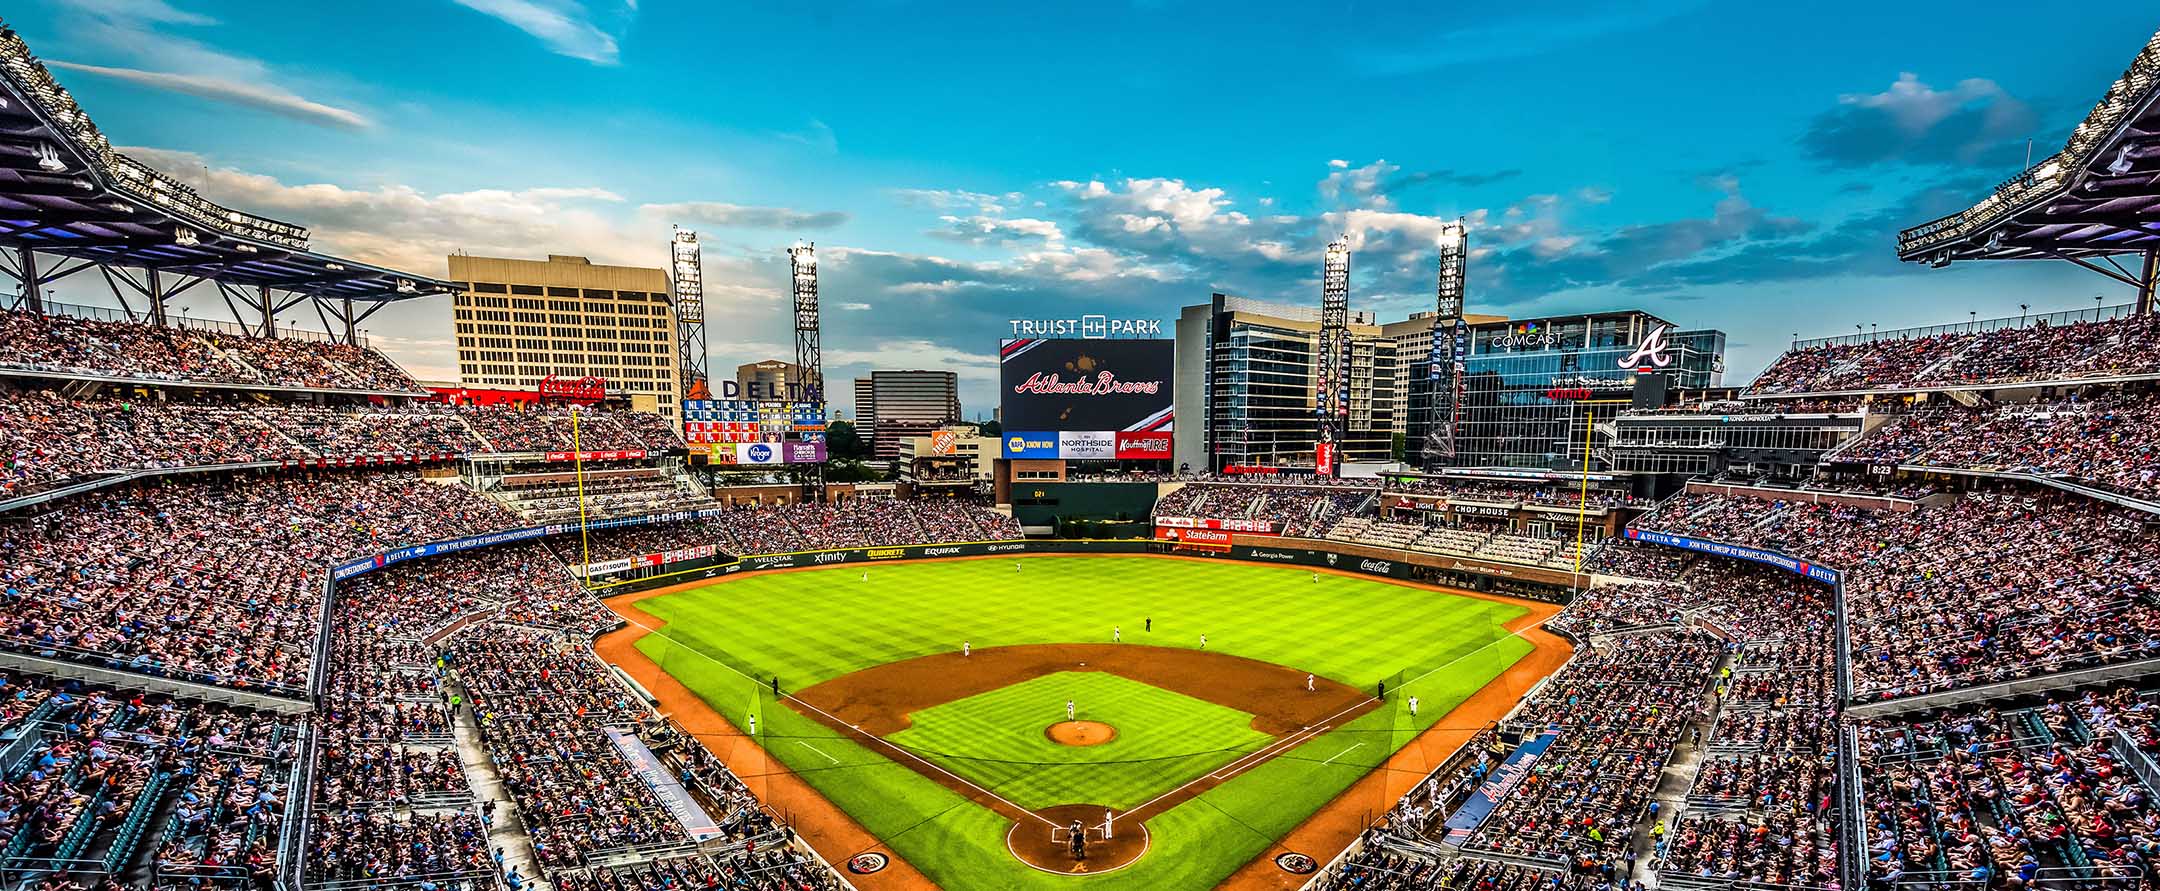 Atlanta Braves will now play home games at the newly named Truist Park